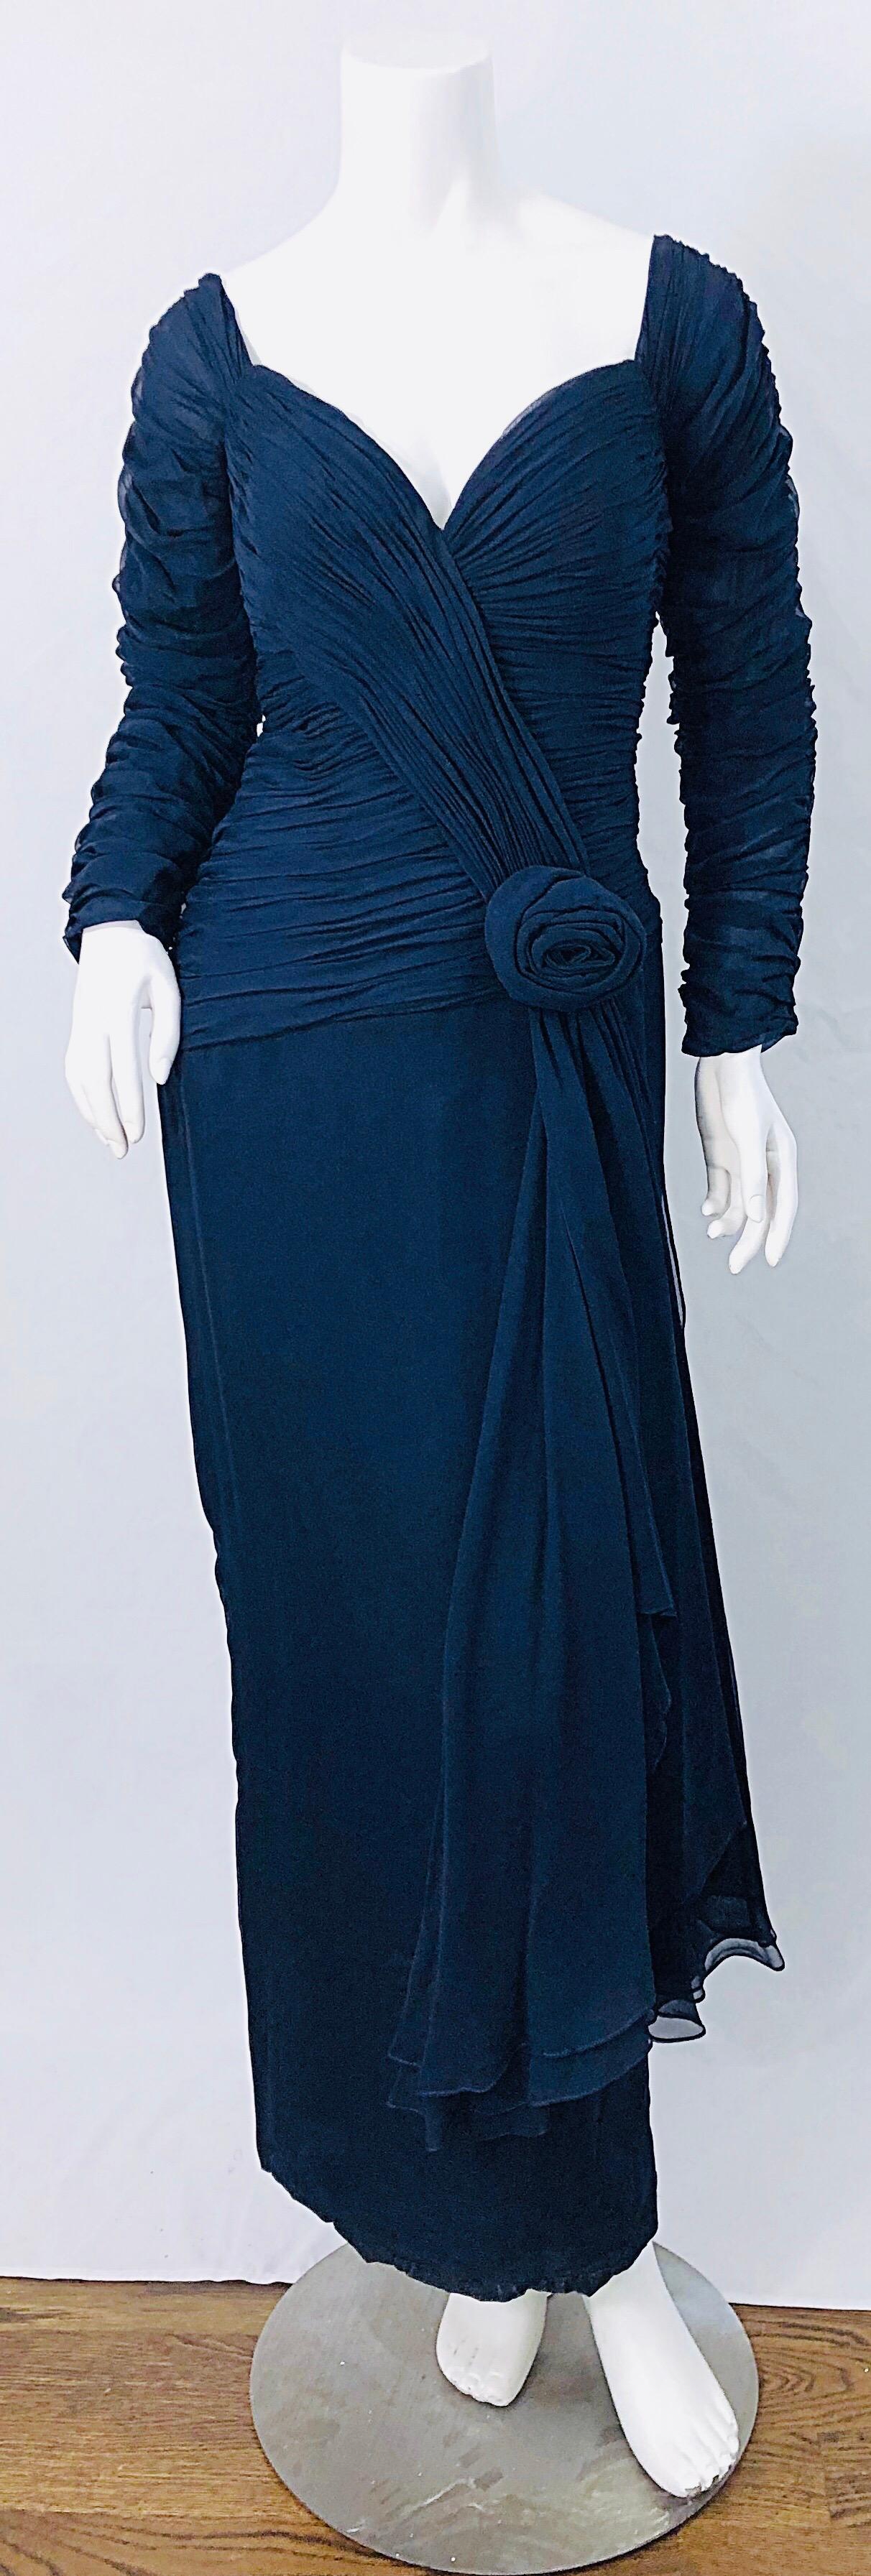 Incredible late 11980s navy blue silk chiffon couture quality long sleeve evening gown ! The perfect alternative to black. Features a boned sweetheart bodice. Flower appliqué at left waist. Layers of chiffon on the skirt look fabulous with movement.